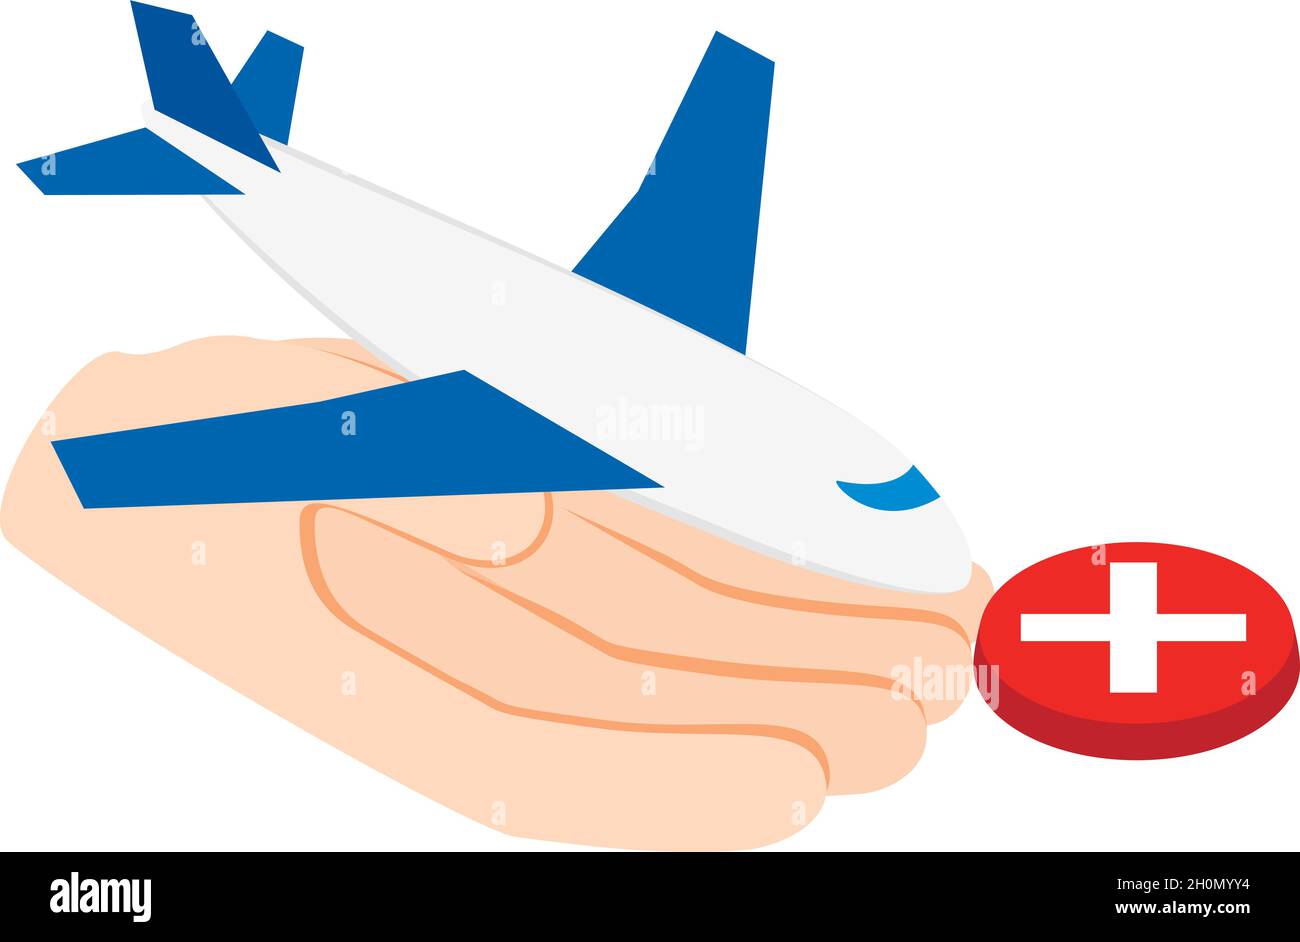 Aviation insurance icon isometric vector. Human hand holding plane, red button. Travel insurance, protection concept Stock Vector